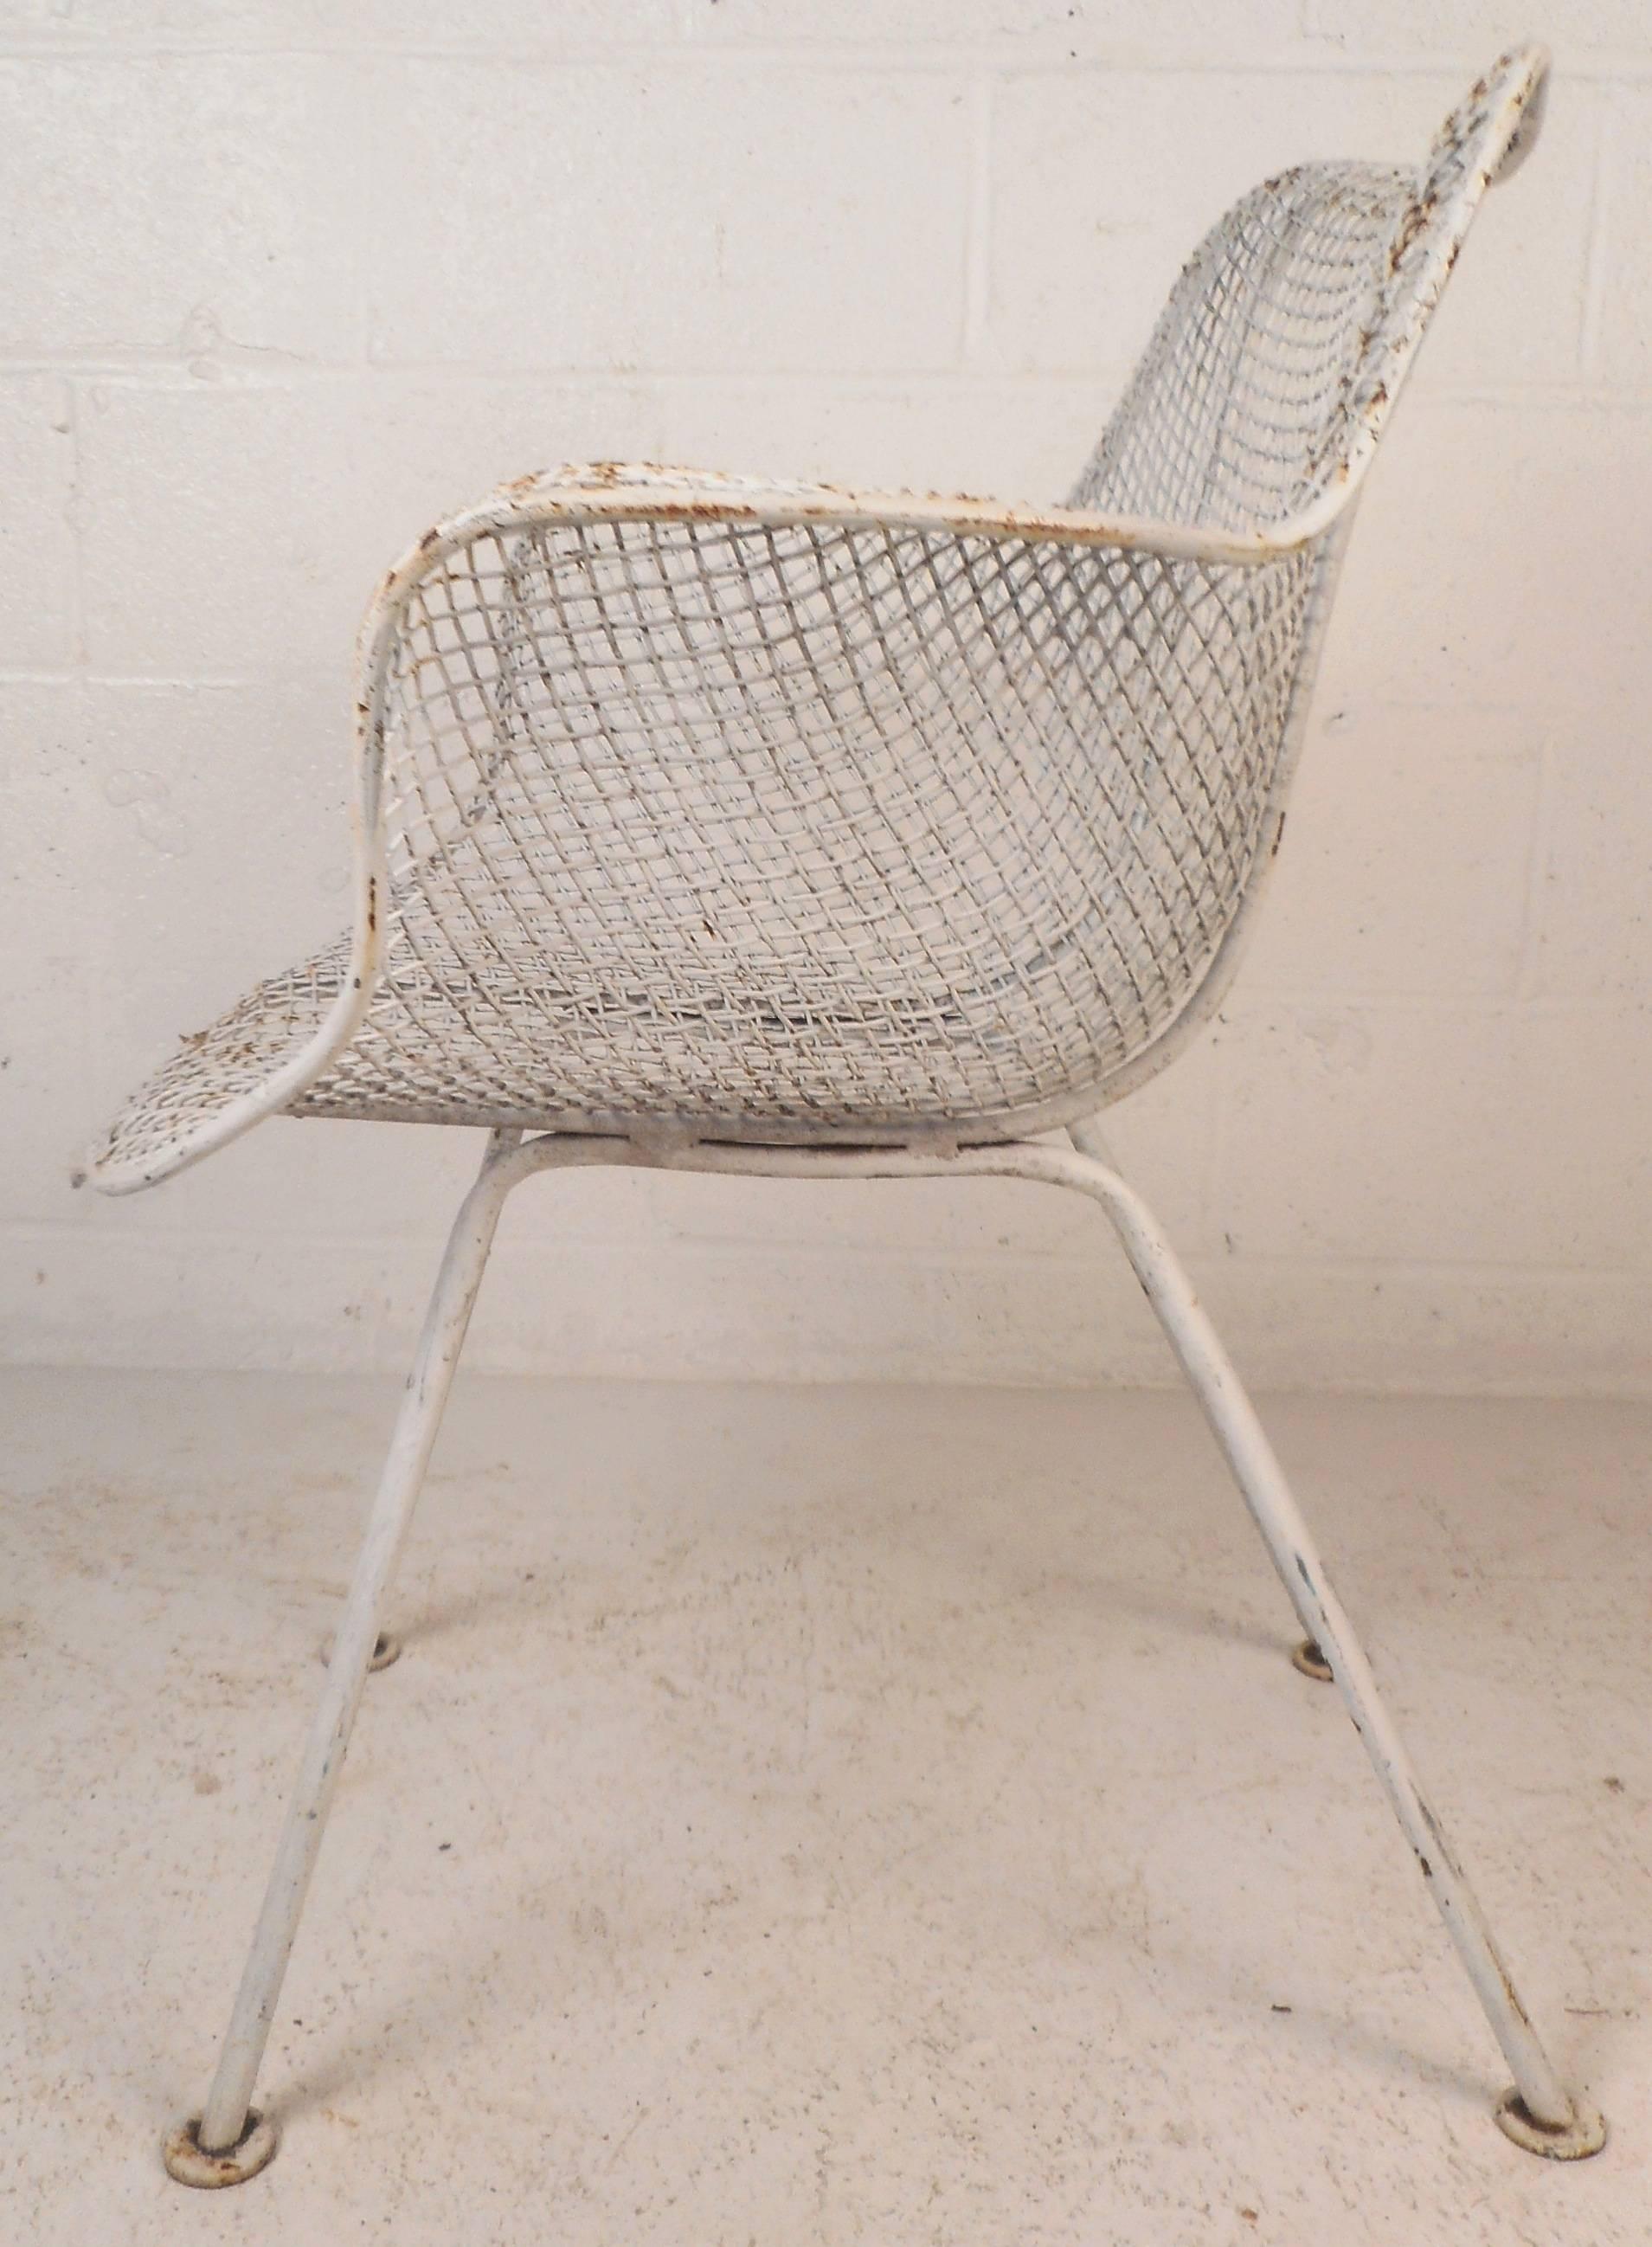 This wonderful vintage modern set of four patio chairs feature sturdy wire mesh frames, angled legs, and unique winged arm rests. The stylish design offers optimal comfort without sacrificing style. This beautiful Mid-Century set make the perfect